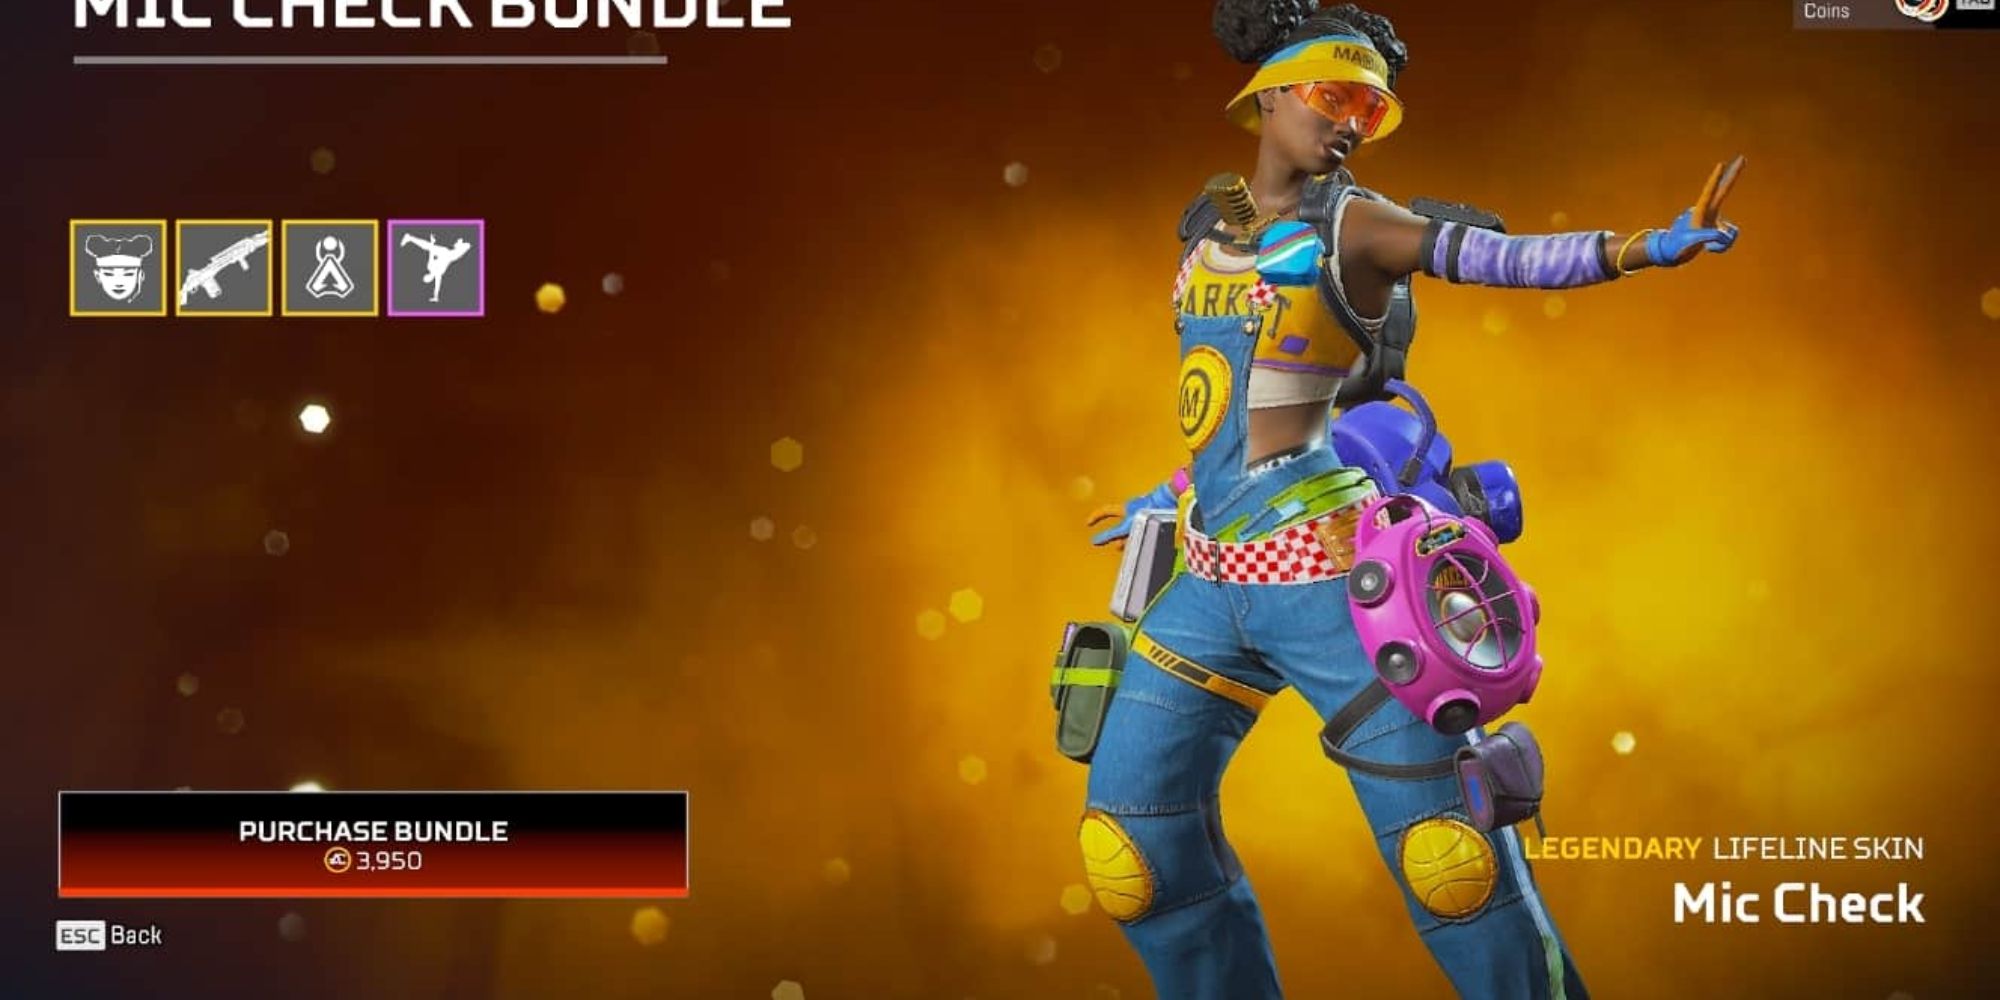 An image of Lifeline's Mic Check skin from Apex Legends